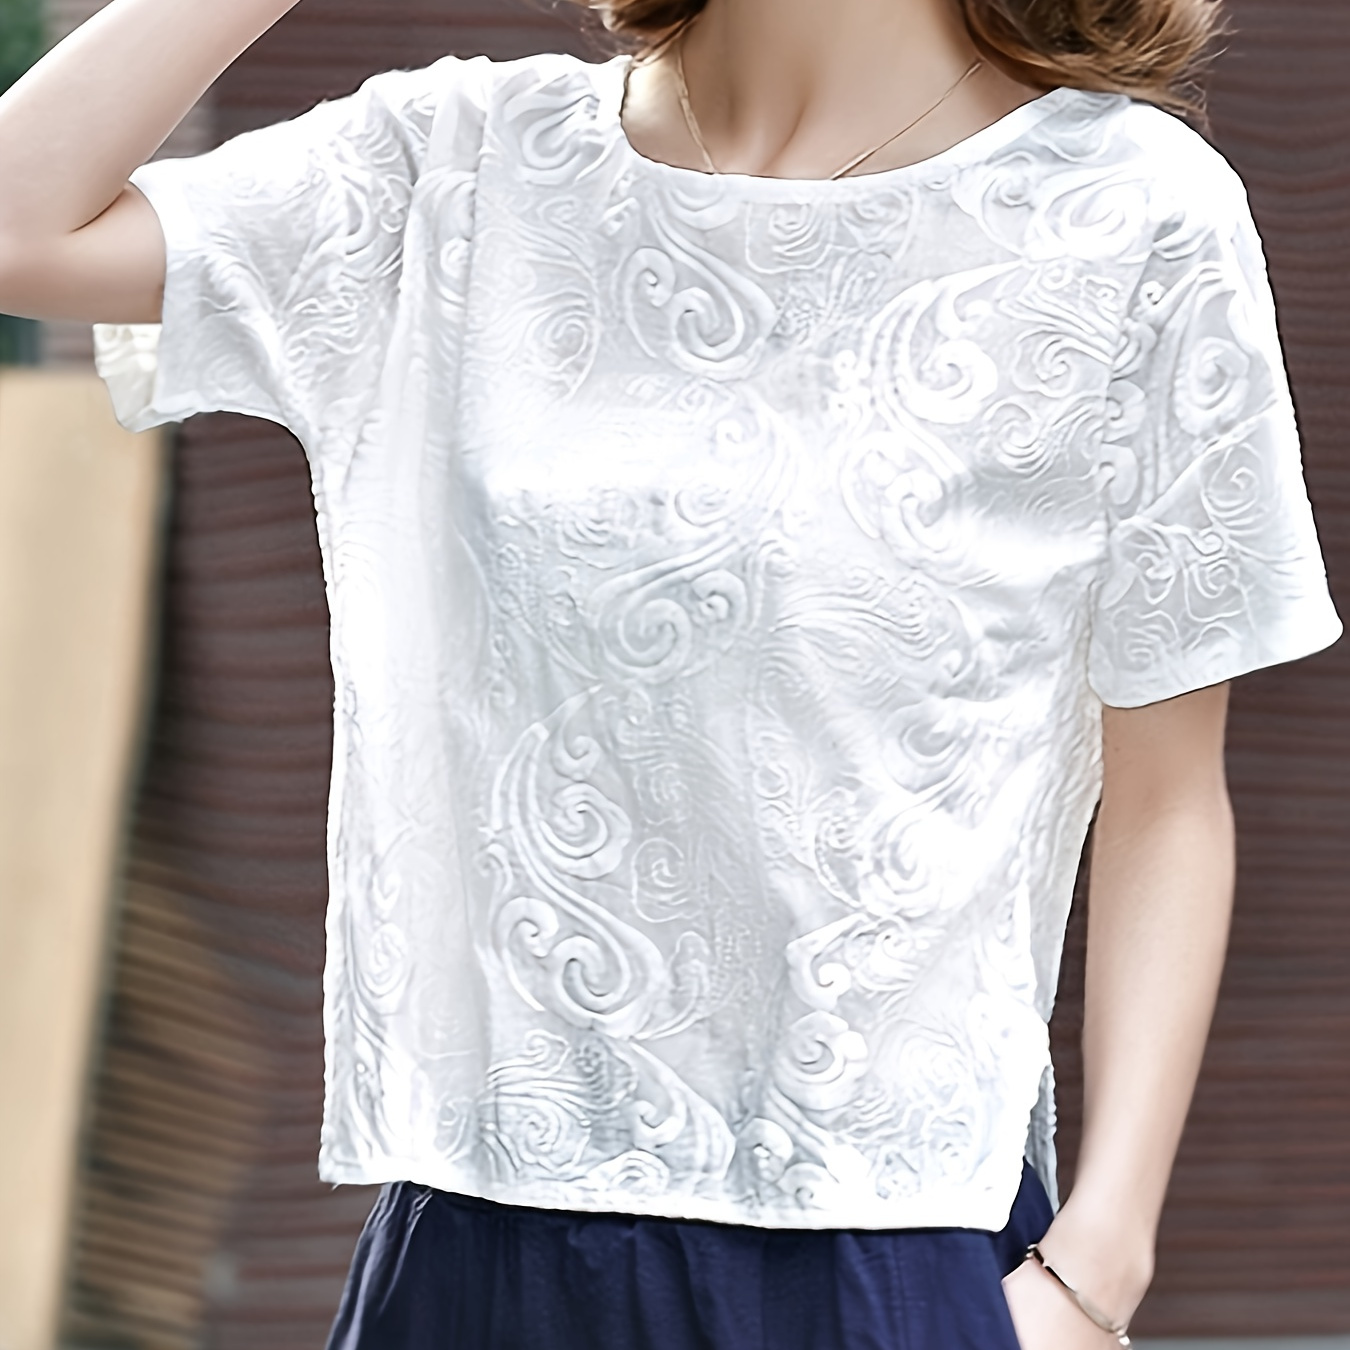 

Split Hem Crew Neck Embroidered Top, Casual Short Sleeve Top For Spring & Summer, Women's Clothing